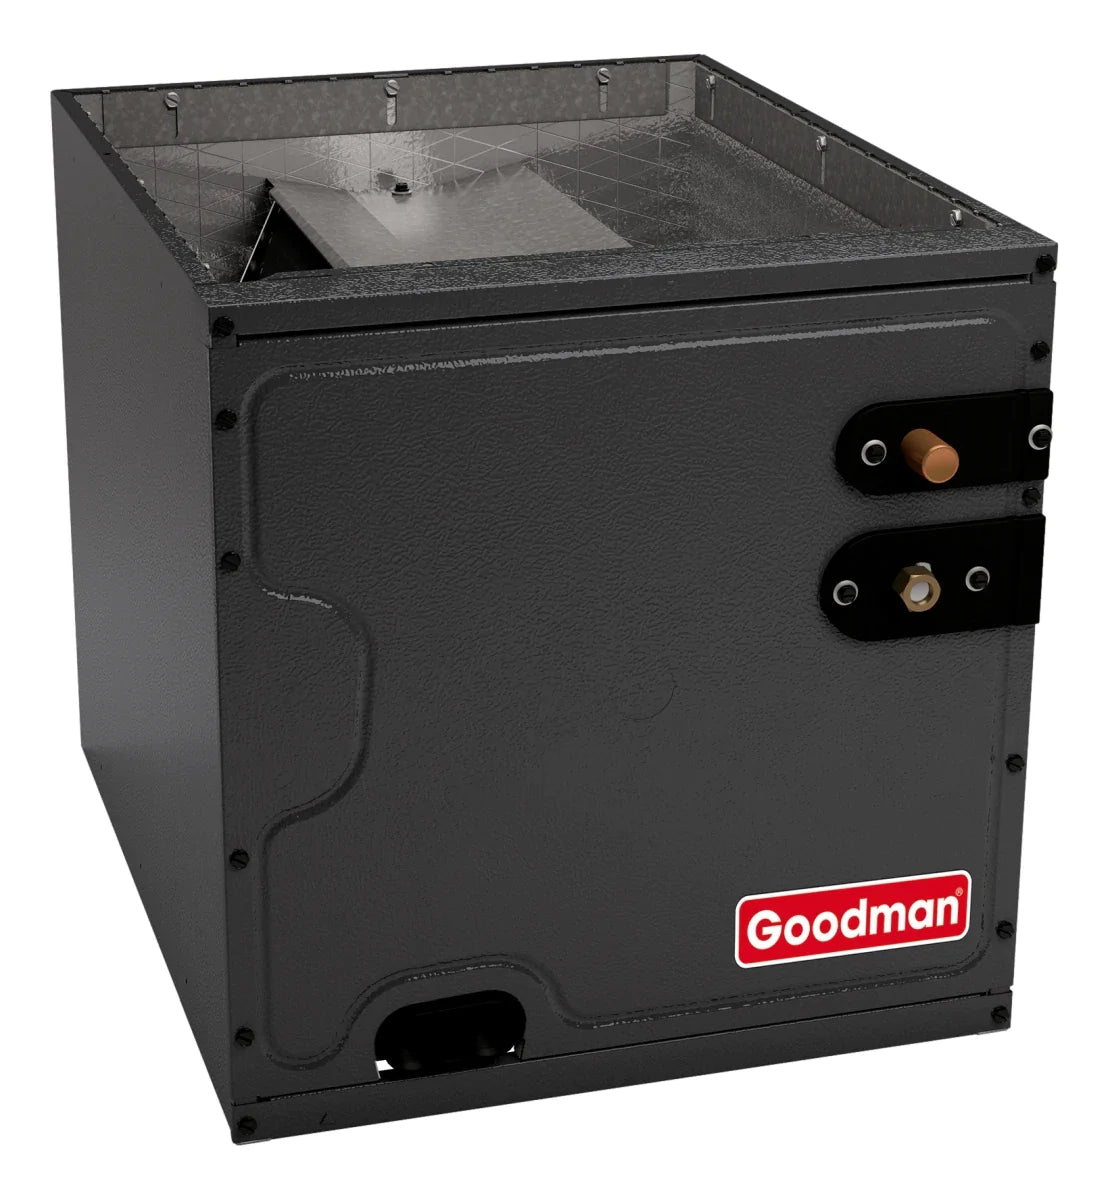 Goodman 1.5 TON 14.5 SEER2 Downflow Heat Pump system with 80% AFUE 60k BTU 2 stage Low NOx Furnace (GSZH501810, CAPTA3022A4, GC9C800603AX)